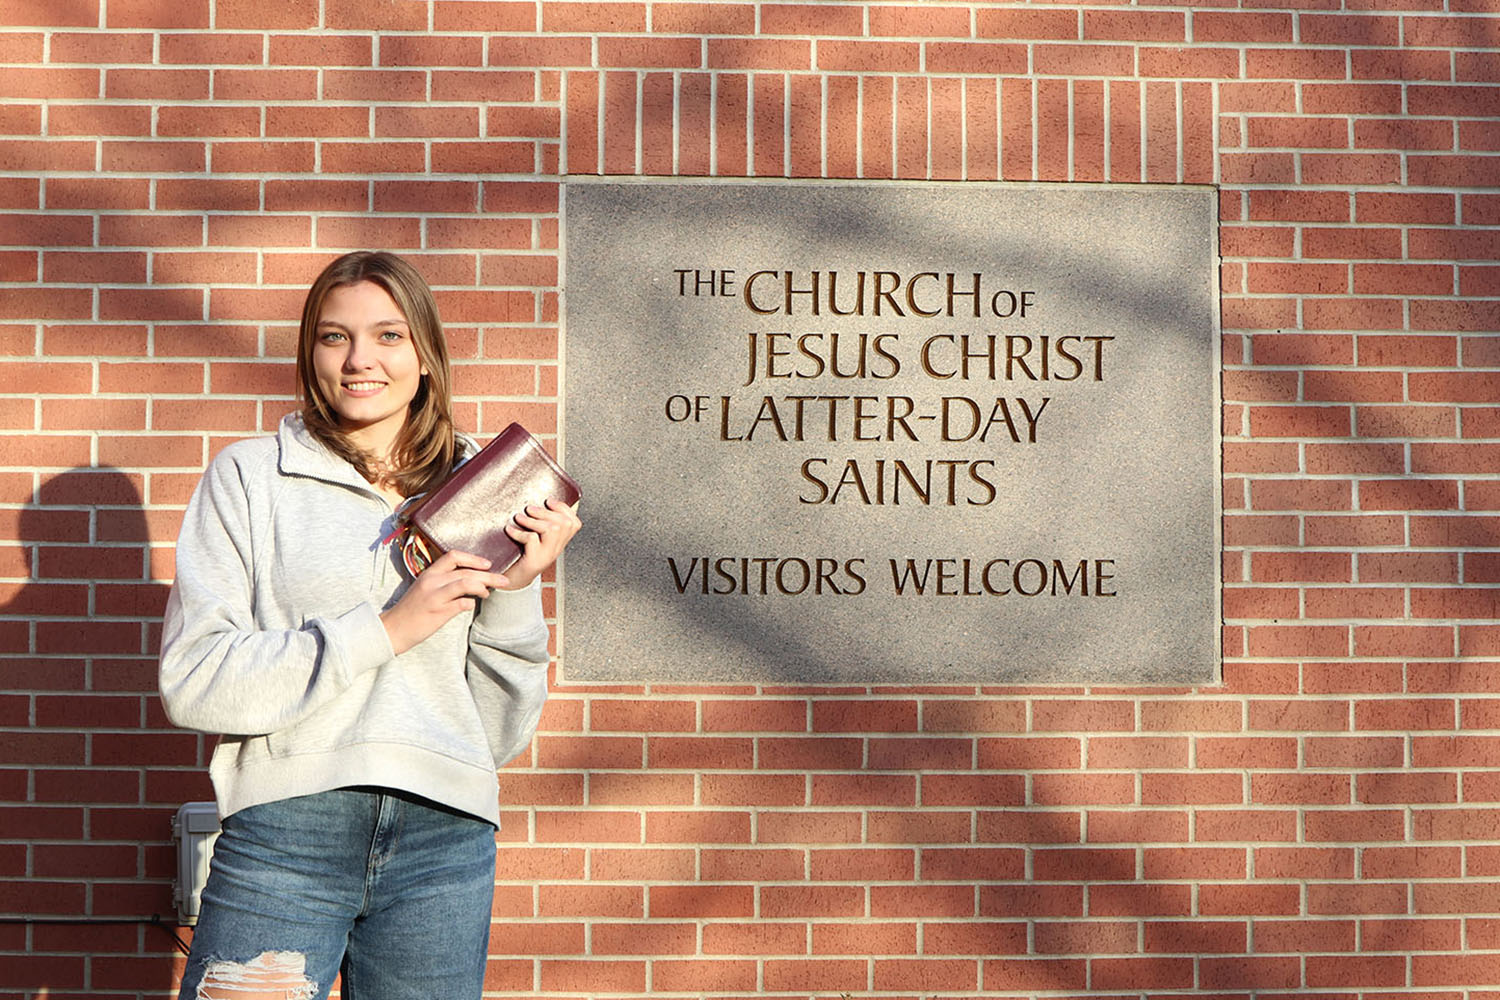 Senior Tenley Moss attends Bible study every morning before school to enrich her faith